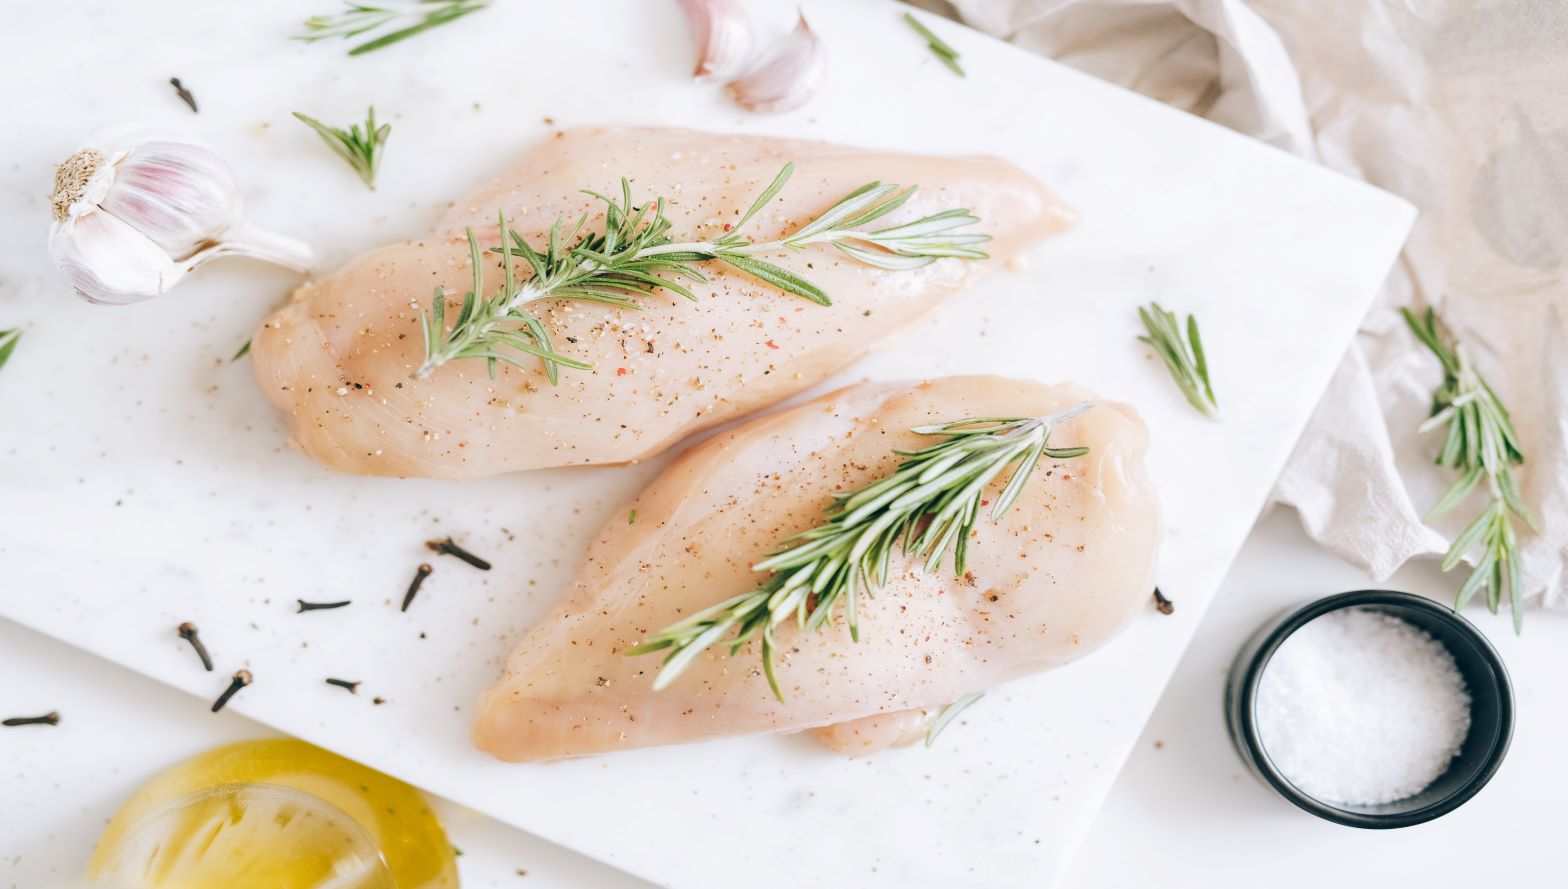 how to process frozen chicken cost-efficiently